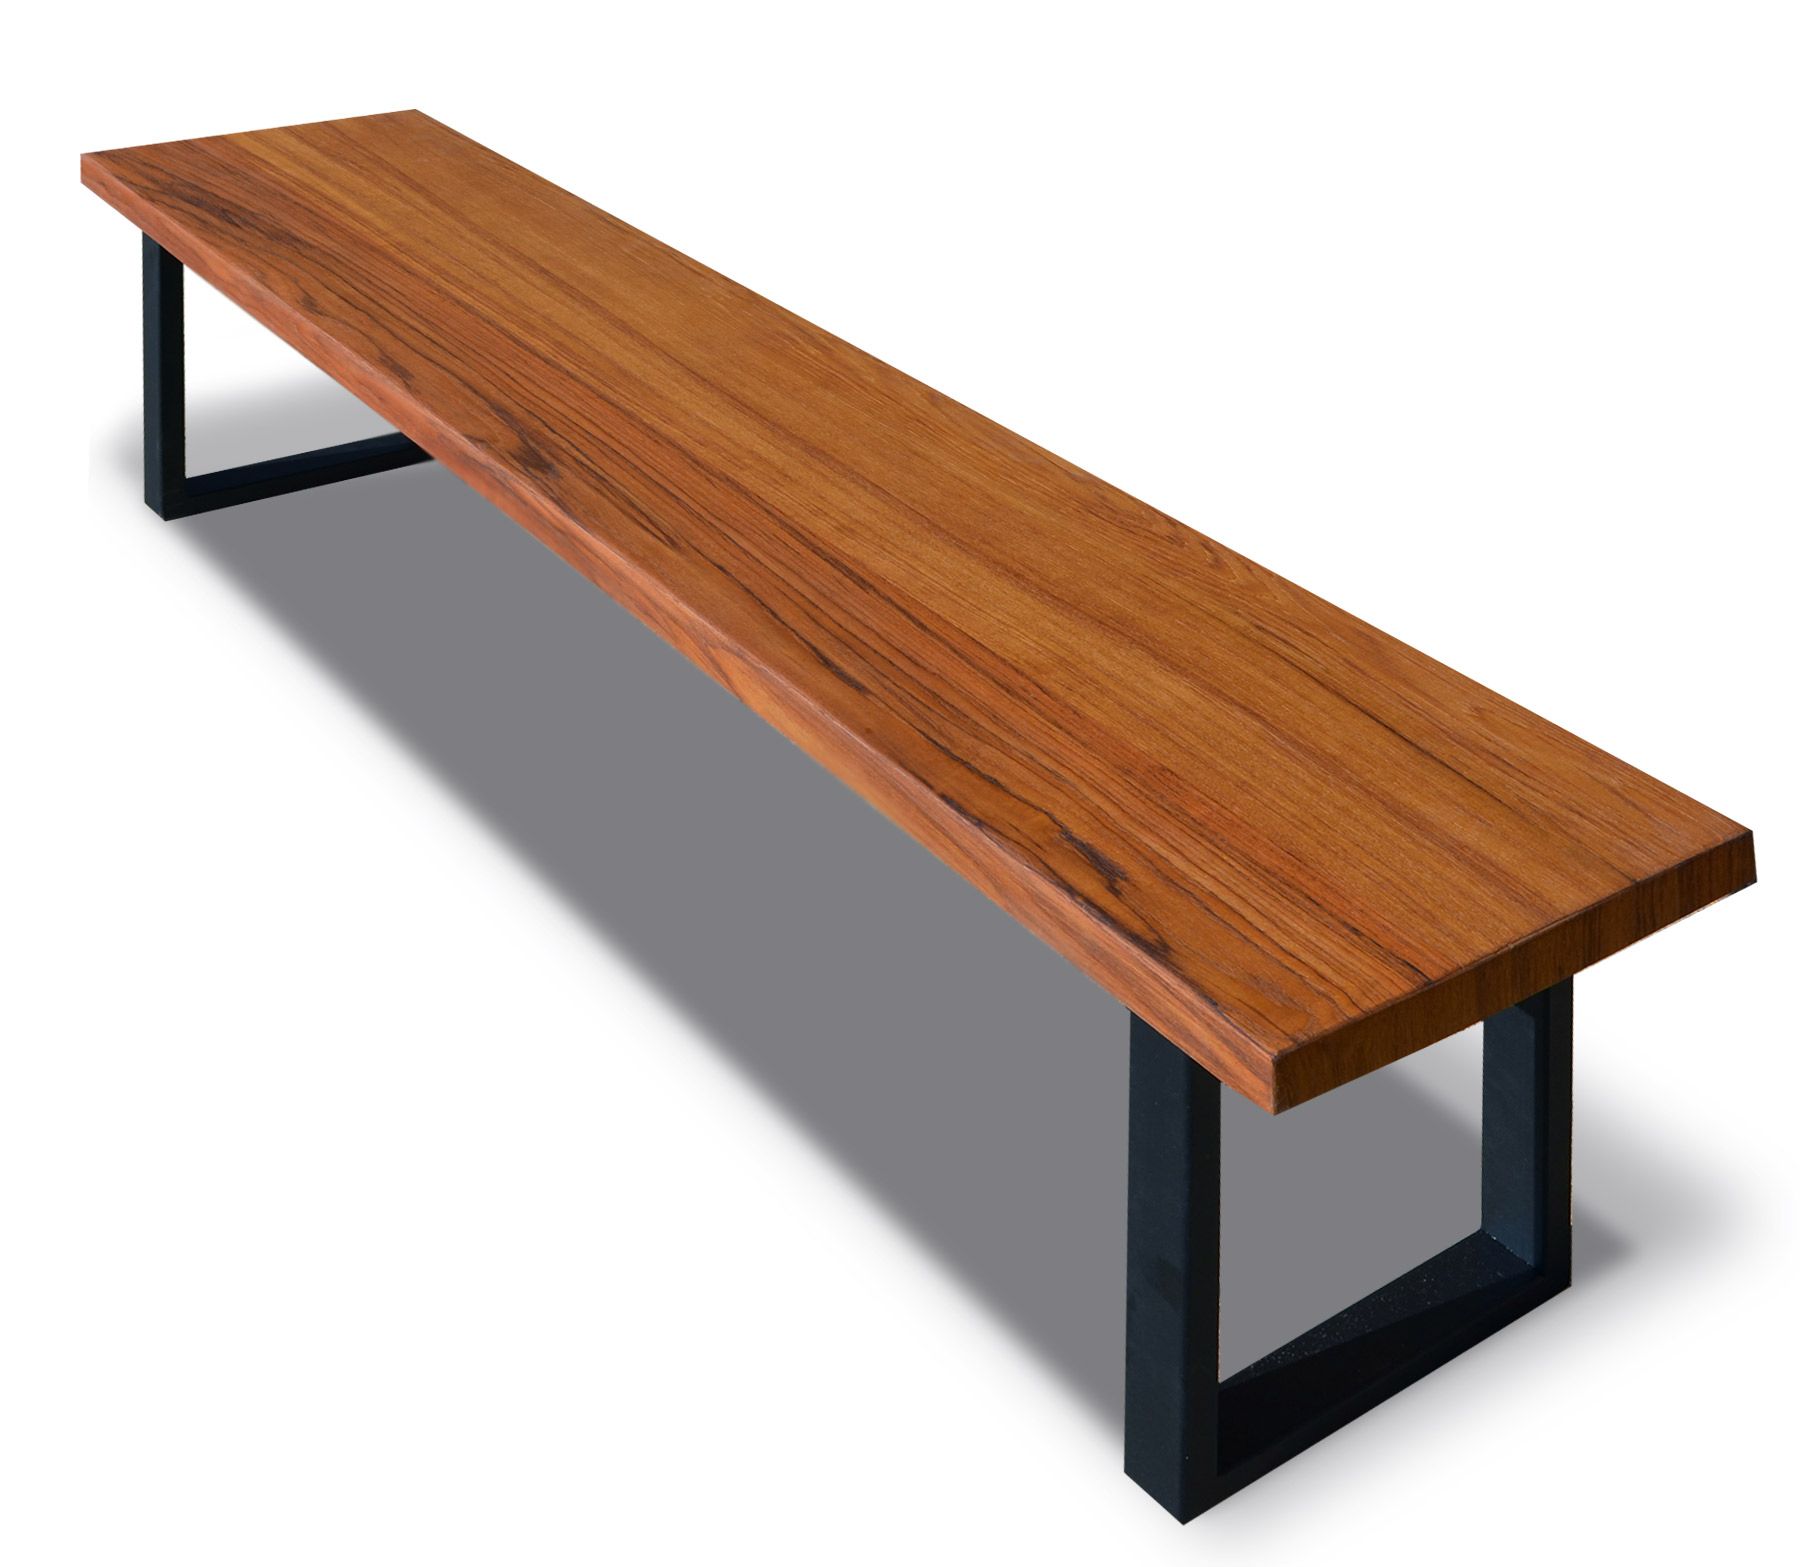 Hand Made Modern Teak Bench With Metal Legs By Abodeacious